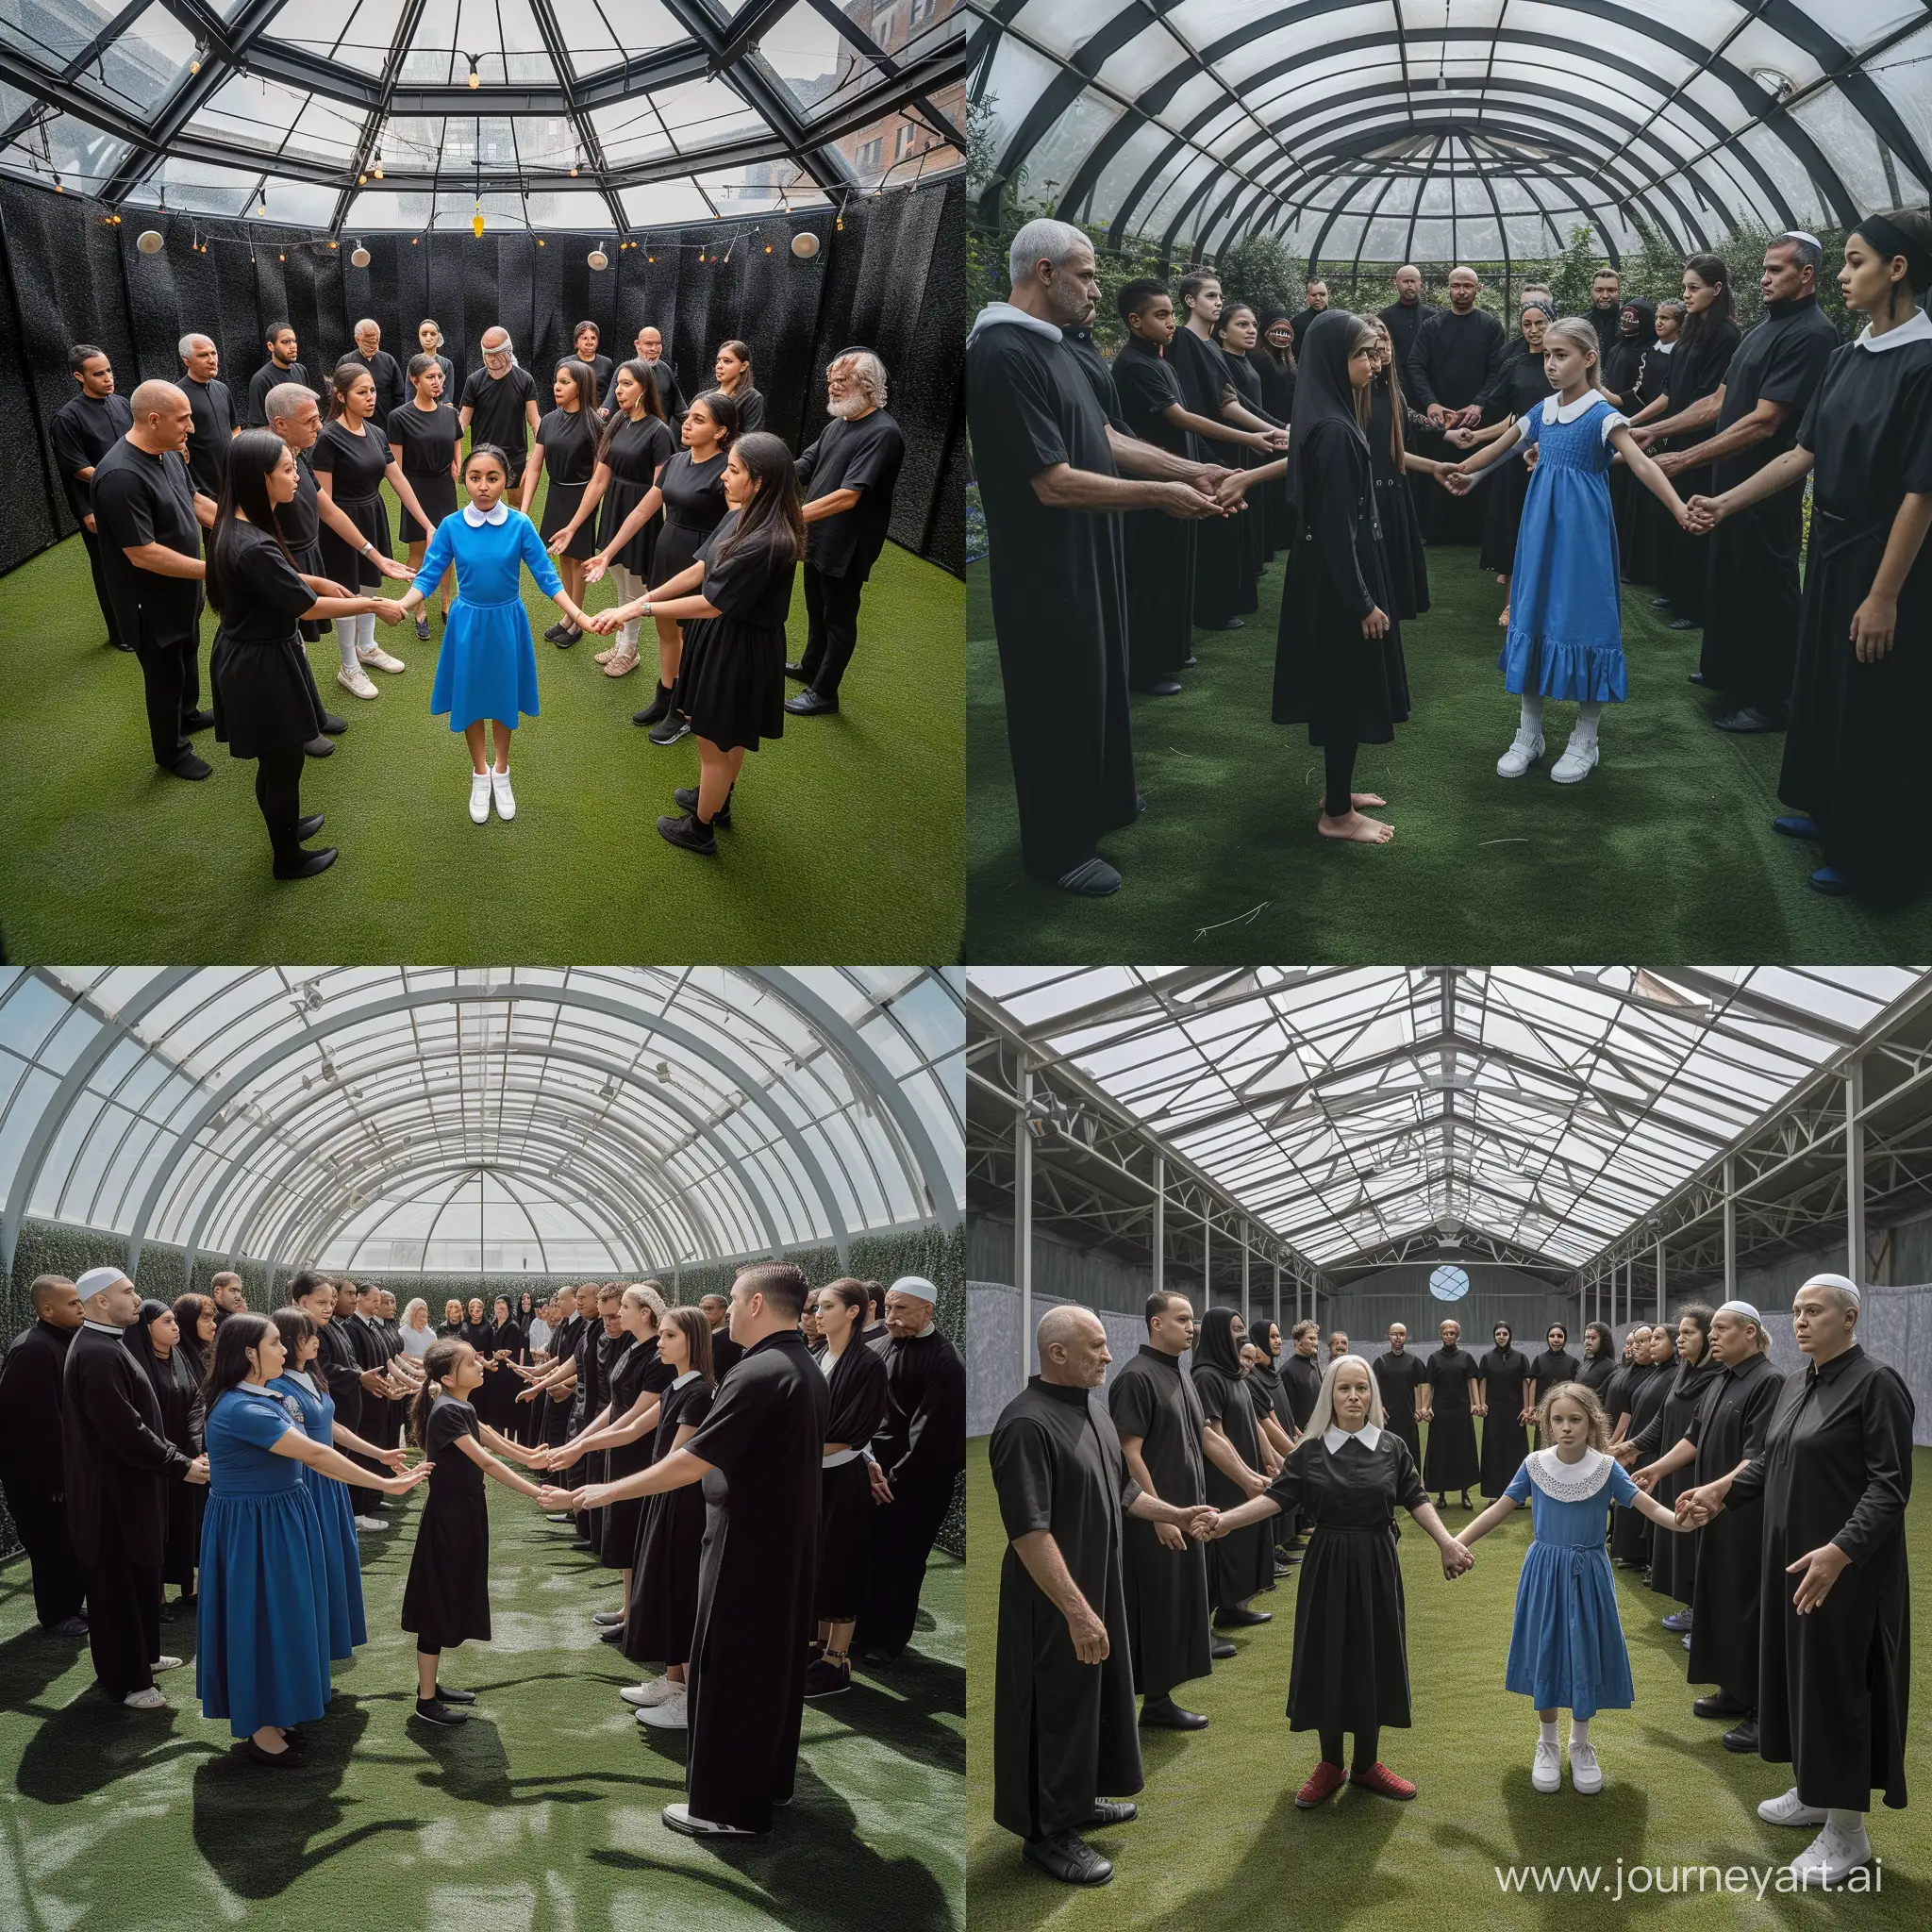 do a  group of people standing in a circle in an enclosed space with open roof and astroturf, white men and women  wearing black, dressed as muslims holding hands except with two firls two teenagers one big sister 25yr old and other younger 17yr old wearing blue dresses with white collar and white short sleeves who are standing and distrupting the circle